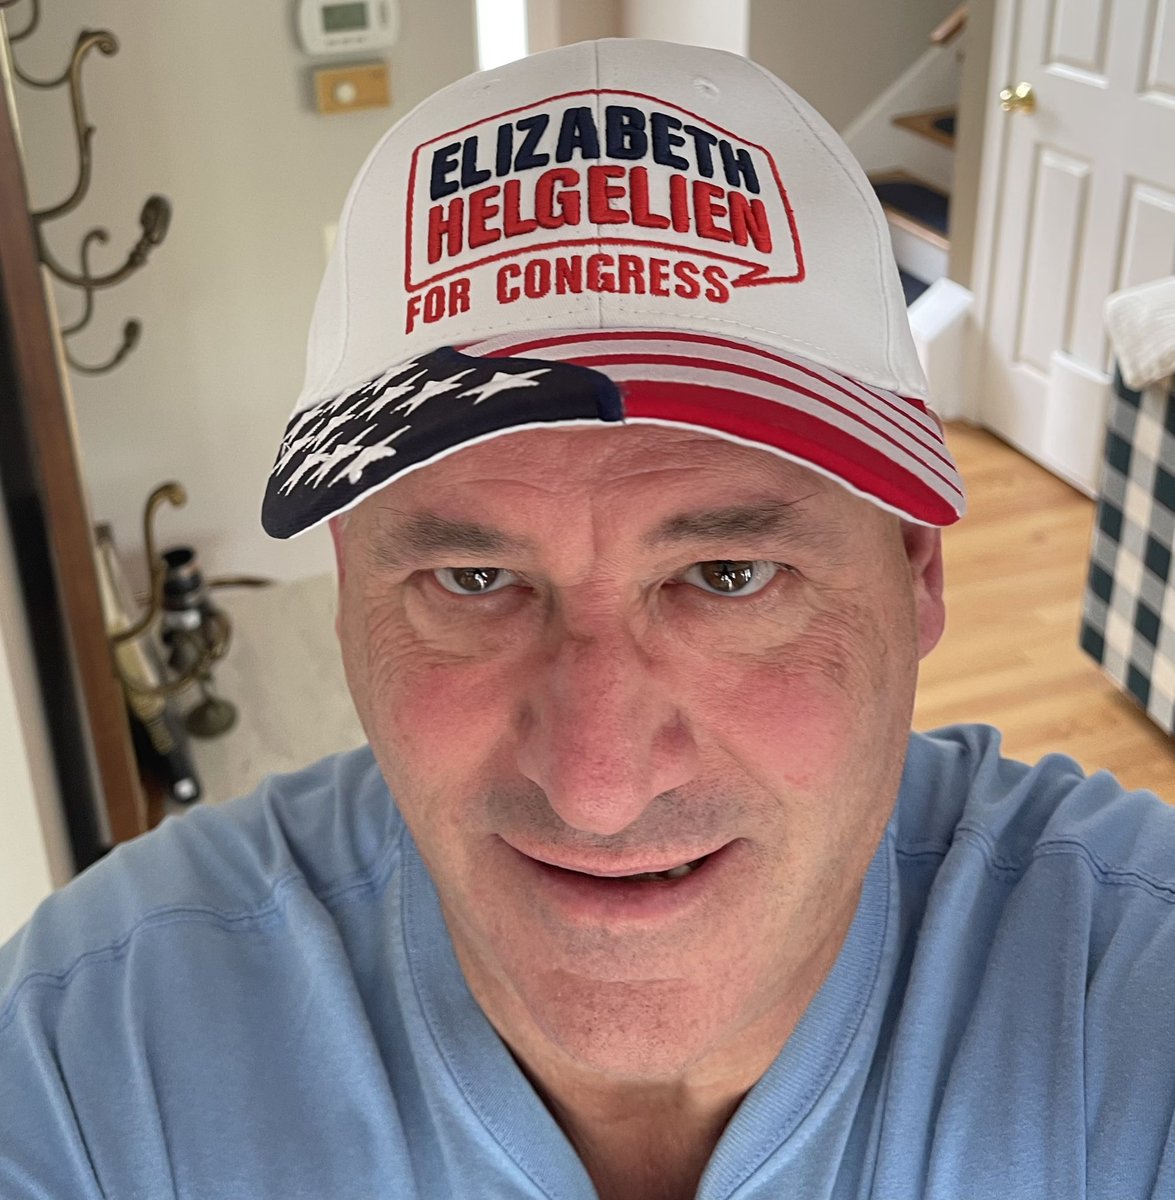 My new hat. Thank you @ElizabethForNV. I wish this #IL11 voter could vote in #NV03. 

elizabethfornv.com

All donate and help Elizabeth today.